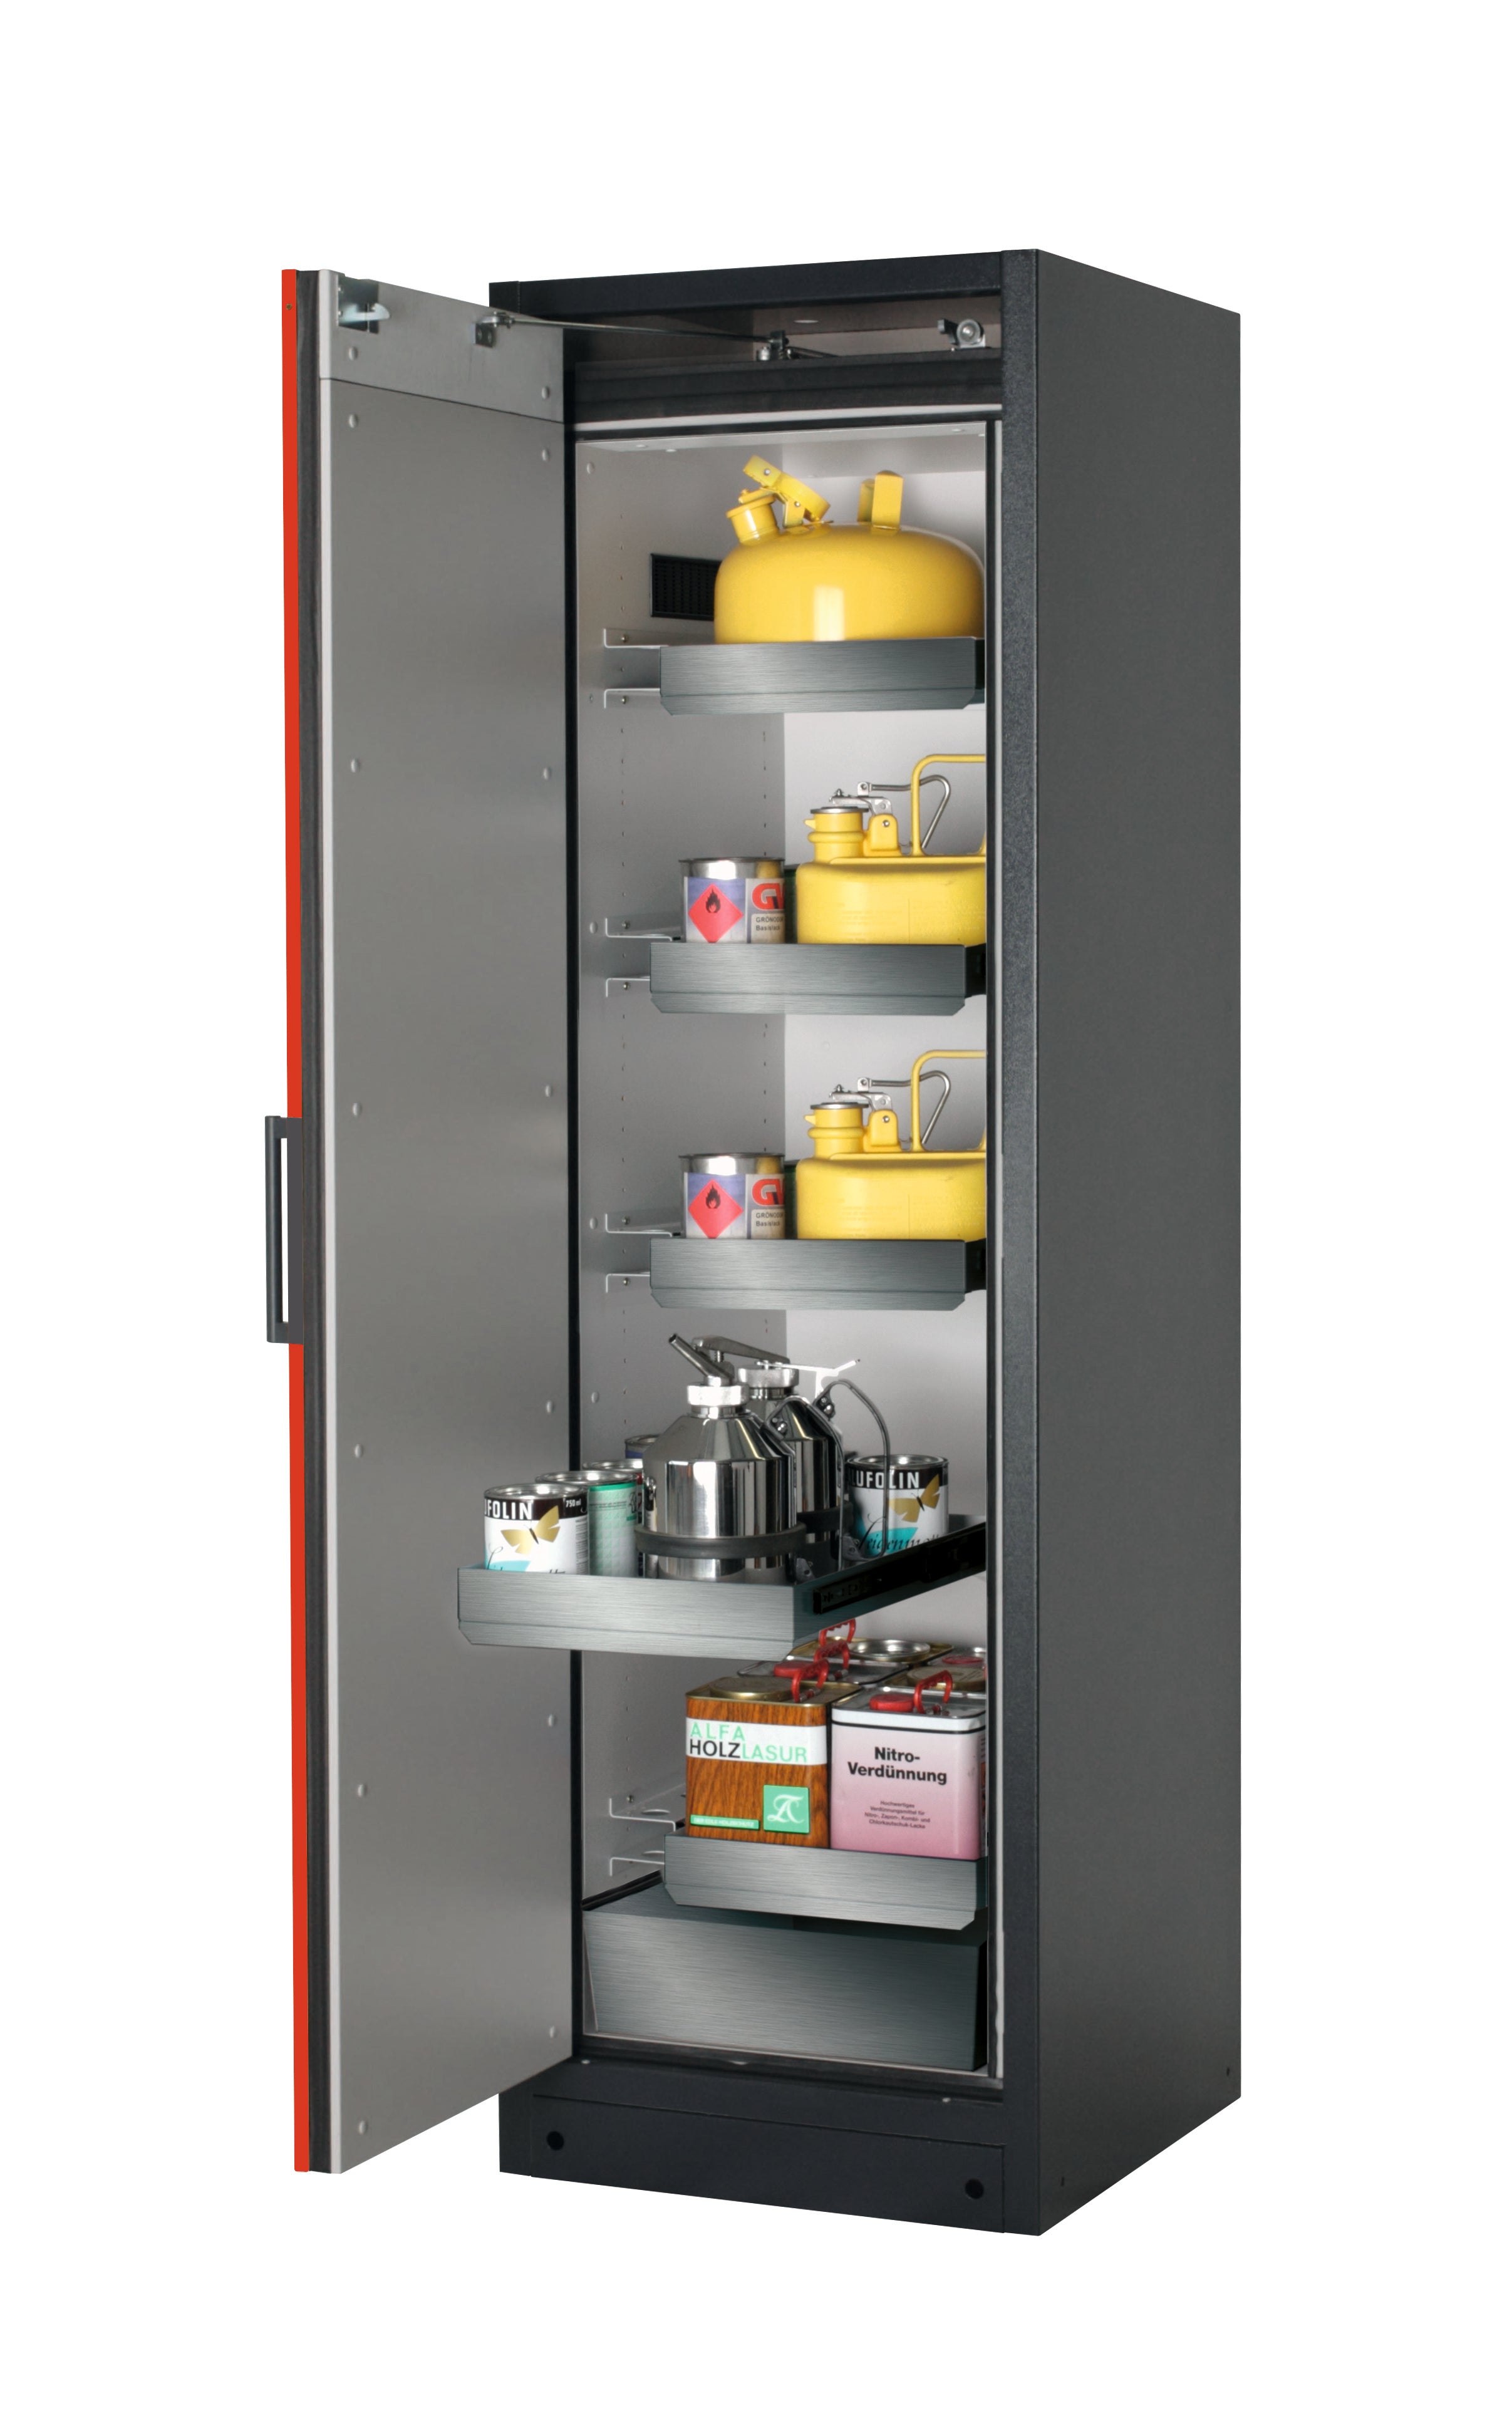 Type 90 safety storage cabinet Q-CLASSIC-90 model Q90.195.060 in traffic red RAL 3020 with 4x drawer (standard) (stainless steel 1.4301),